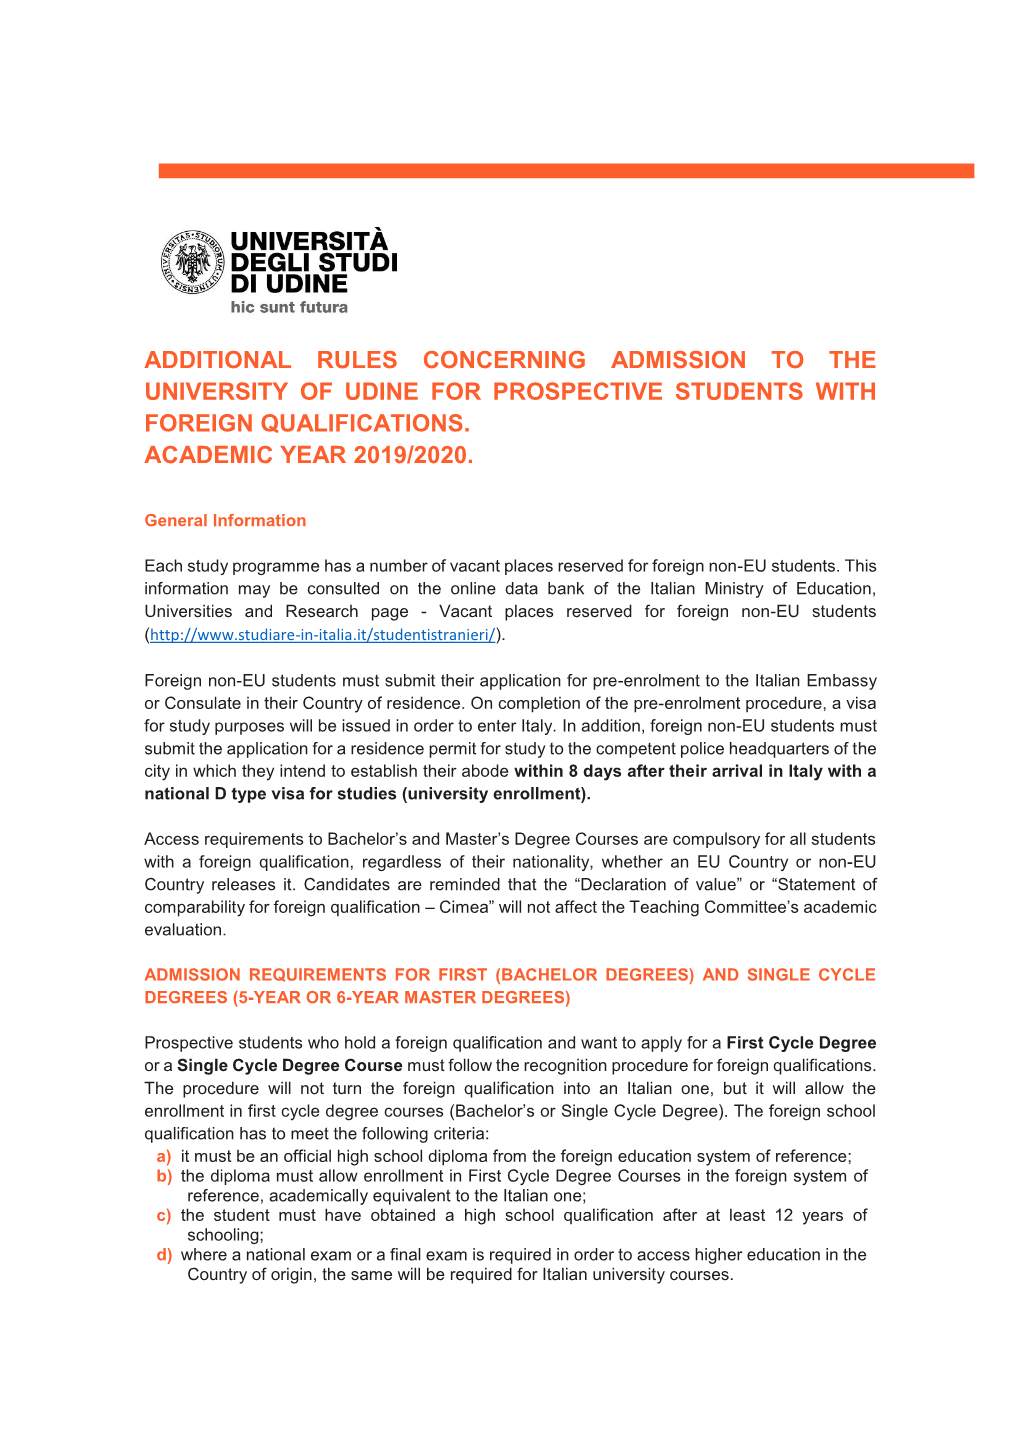 Additional Rules Concerning Admission to the University of Udine for Prospective Students with Foreign Qualifications